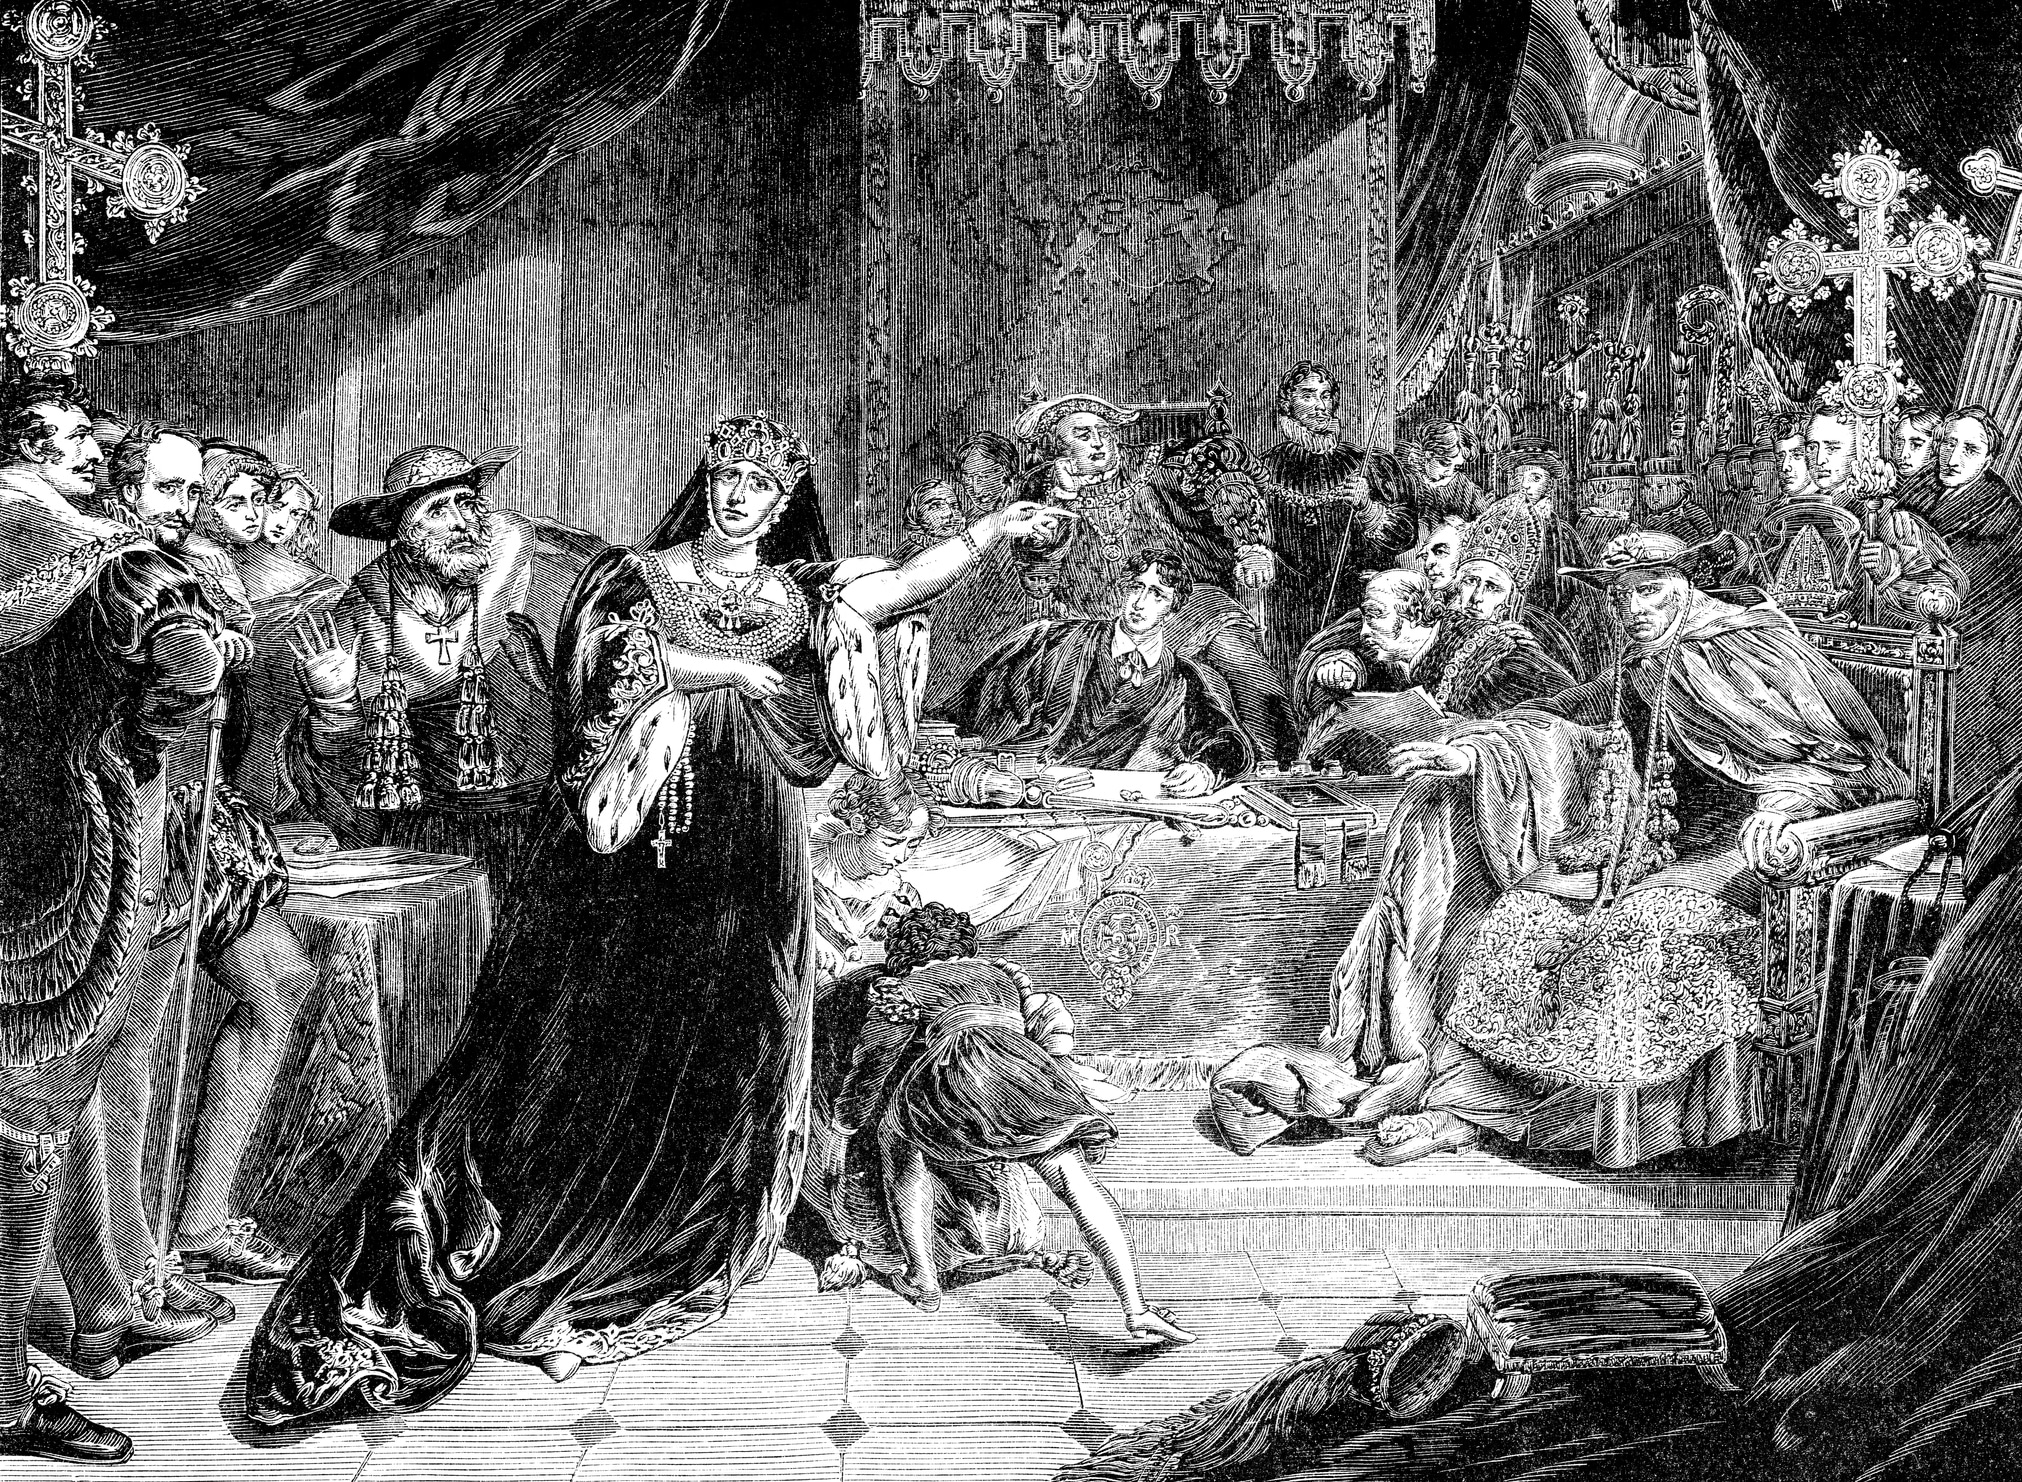 An engraved vintage illustration image of the trial of Catherine Of Aragon, queen of England, UK, from a Victorian book dated 1868 that is no longer in copyright